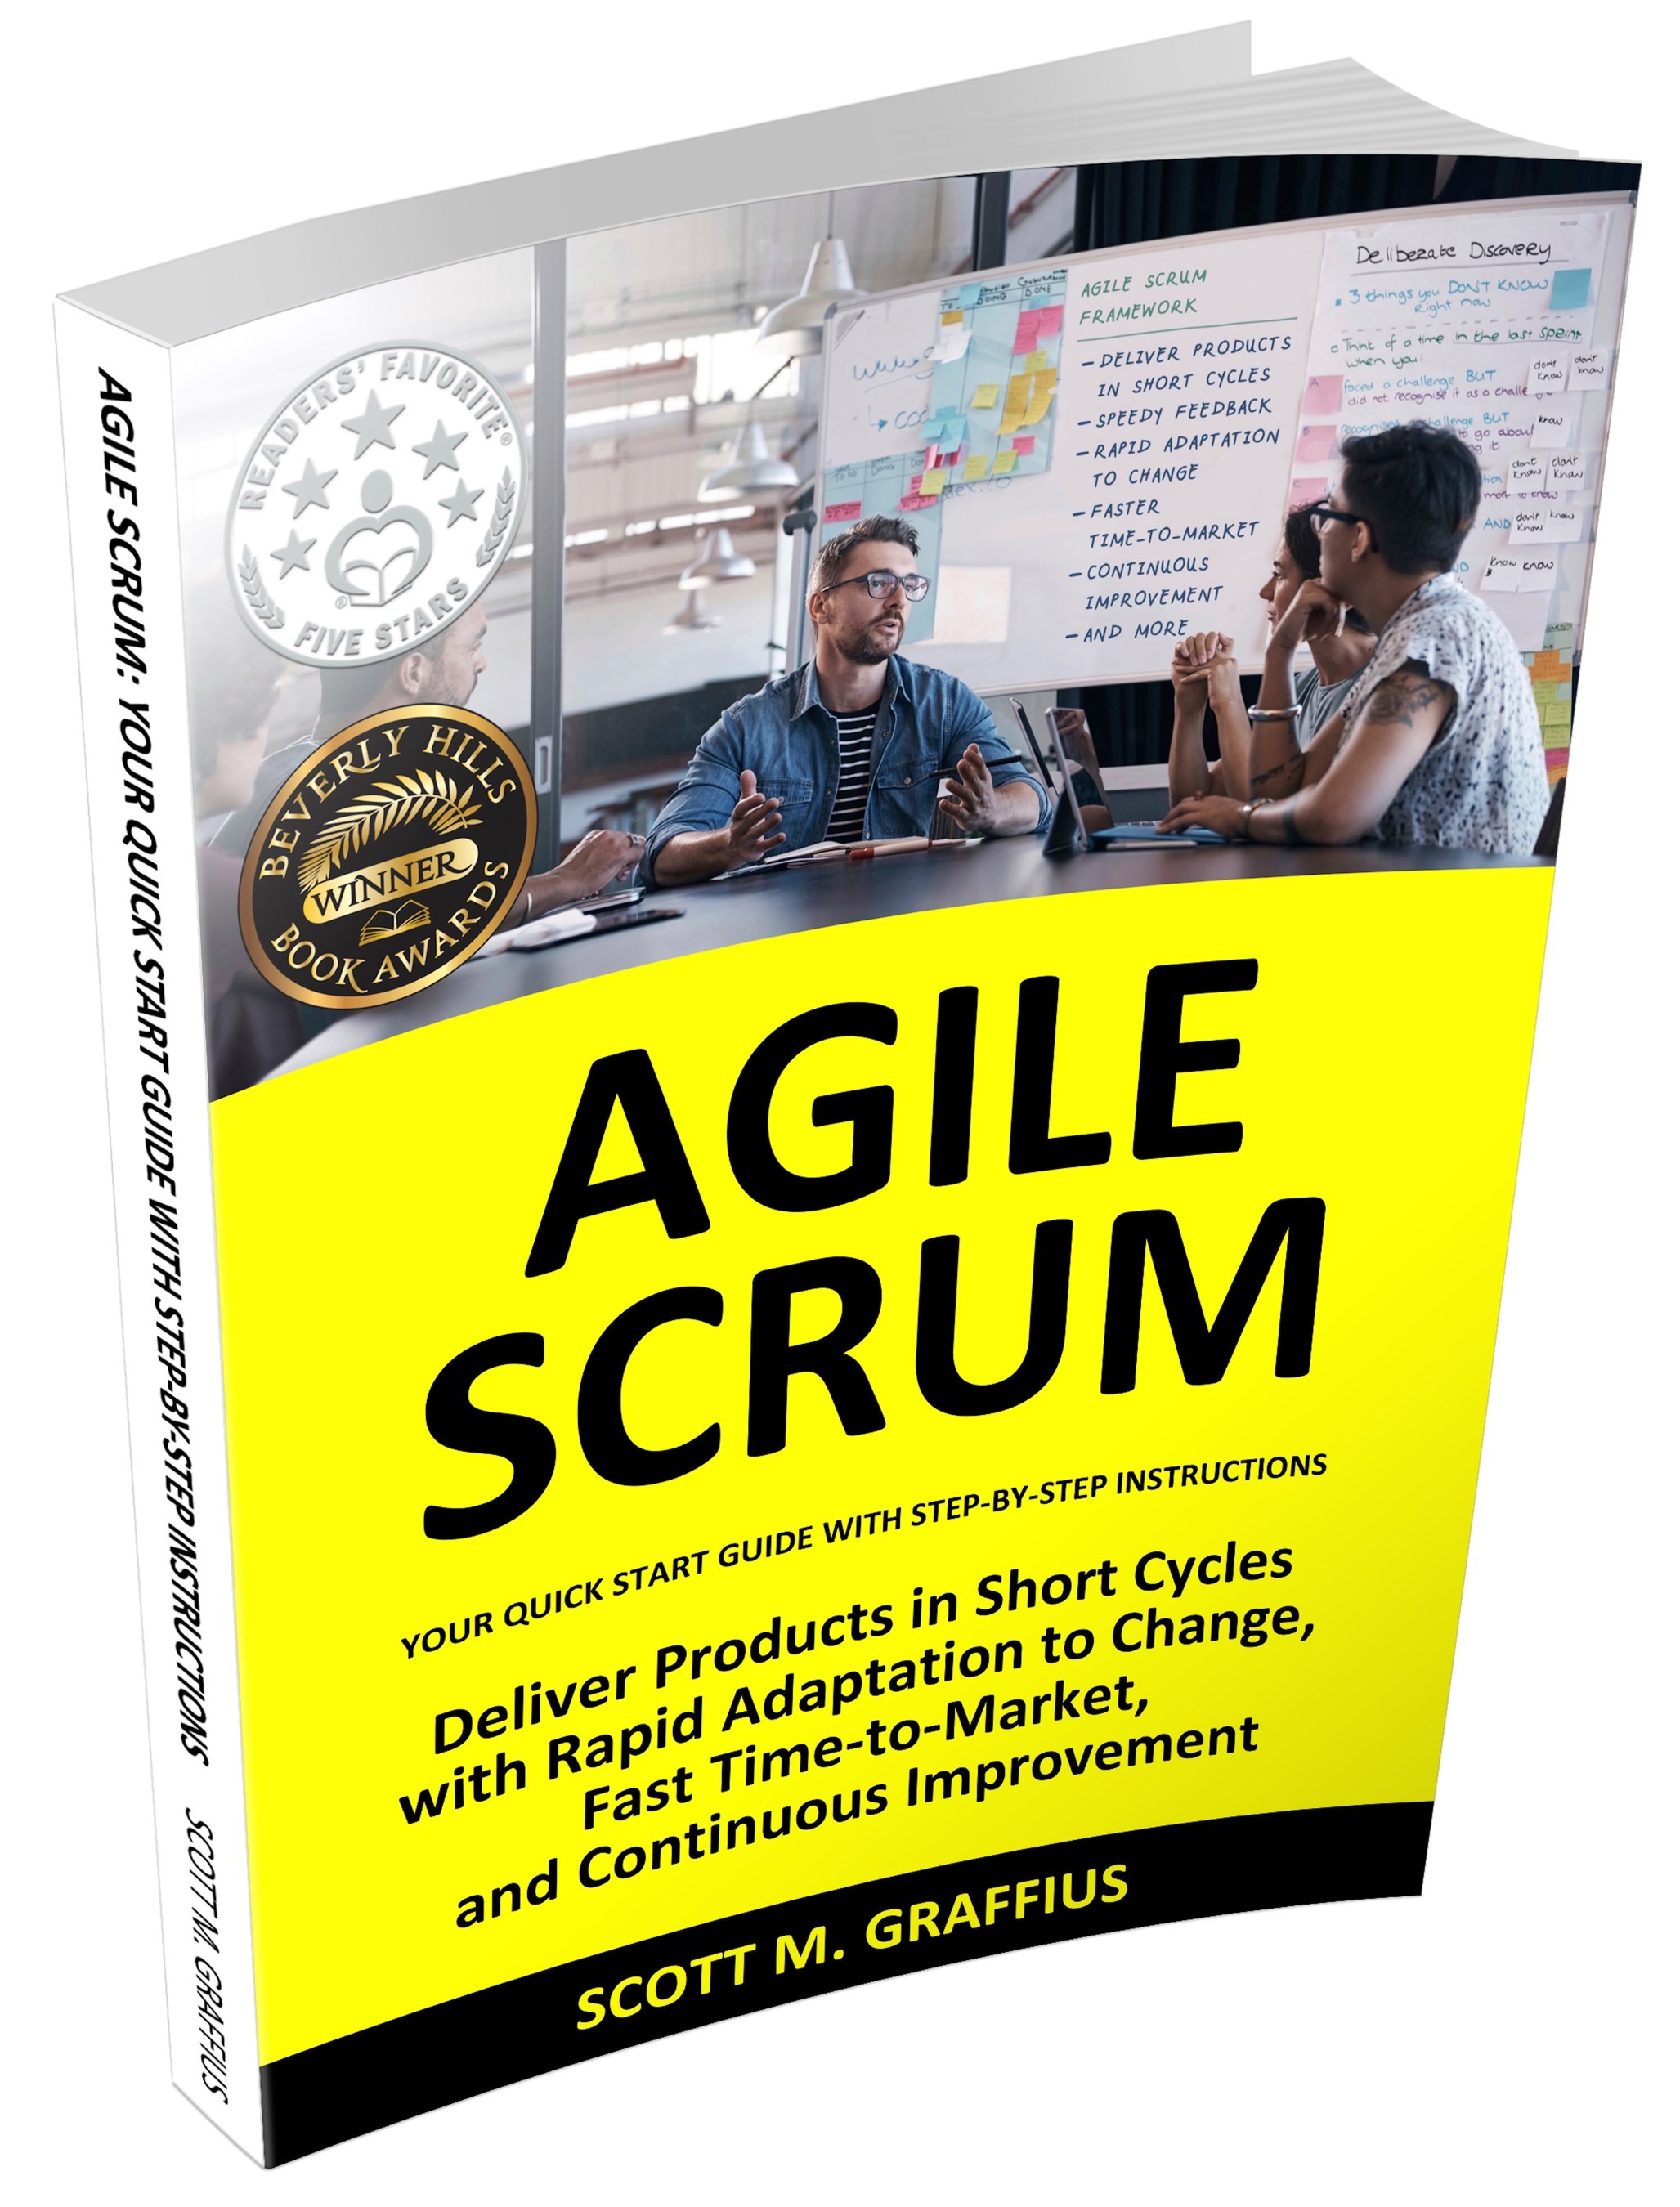 Agile Scrum: Your Quick Start Guide with Step-by-Step Instructions by Scott M. Graffius - Winner of 12 First Place Awards